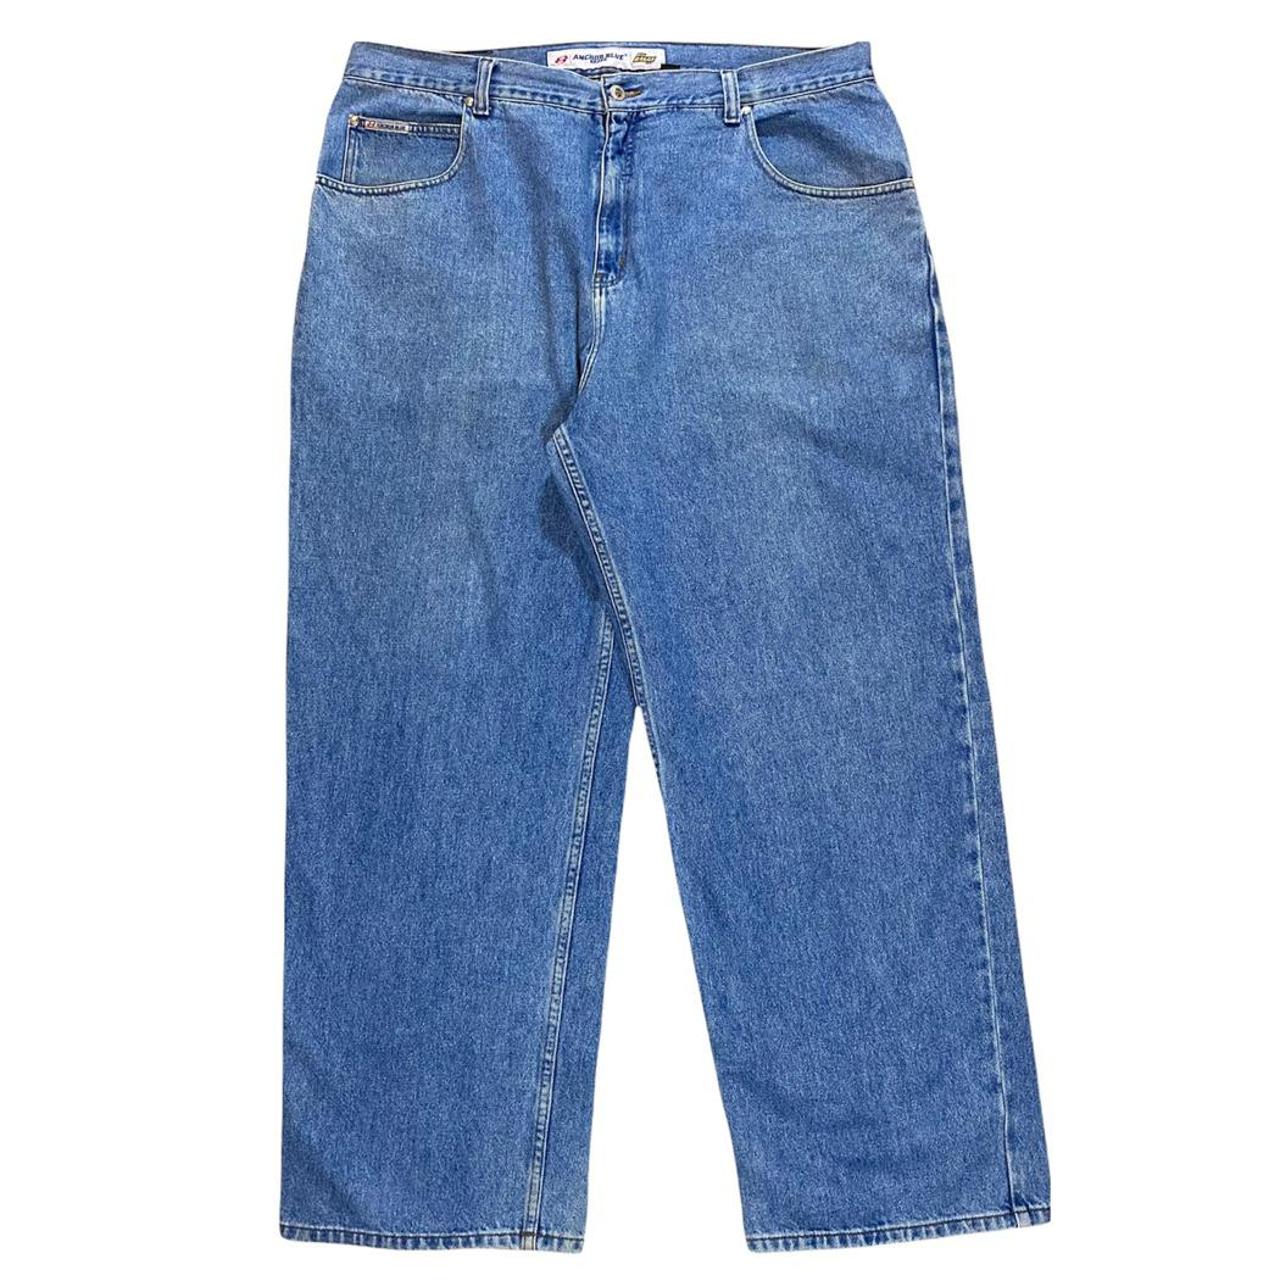 Product Image 4 - Anchor blue big baggy jeans